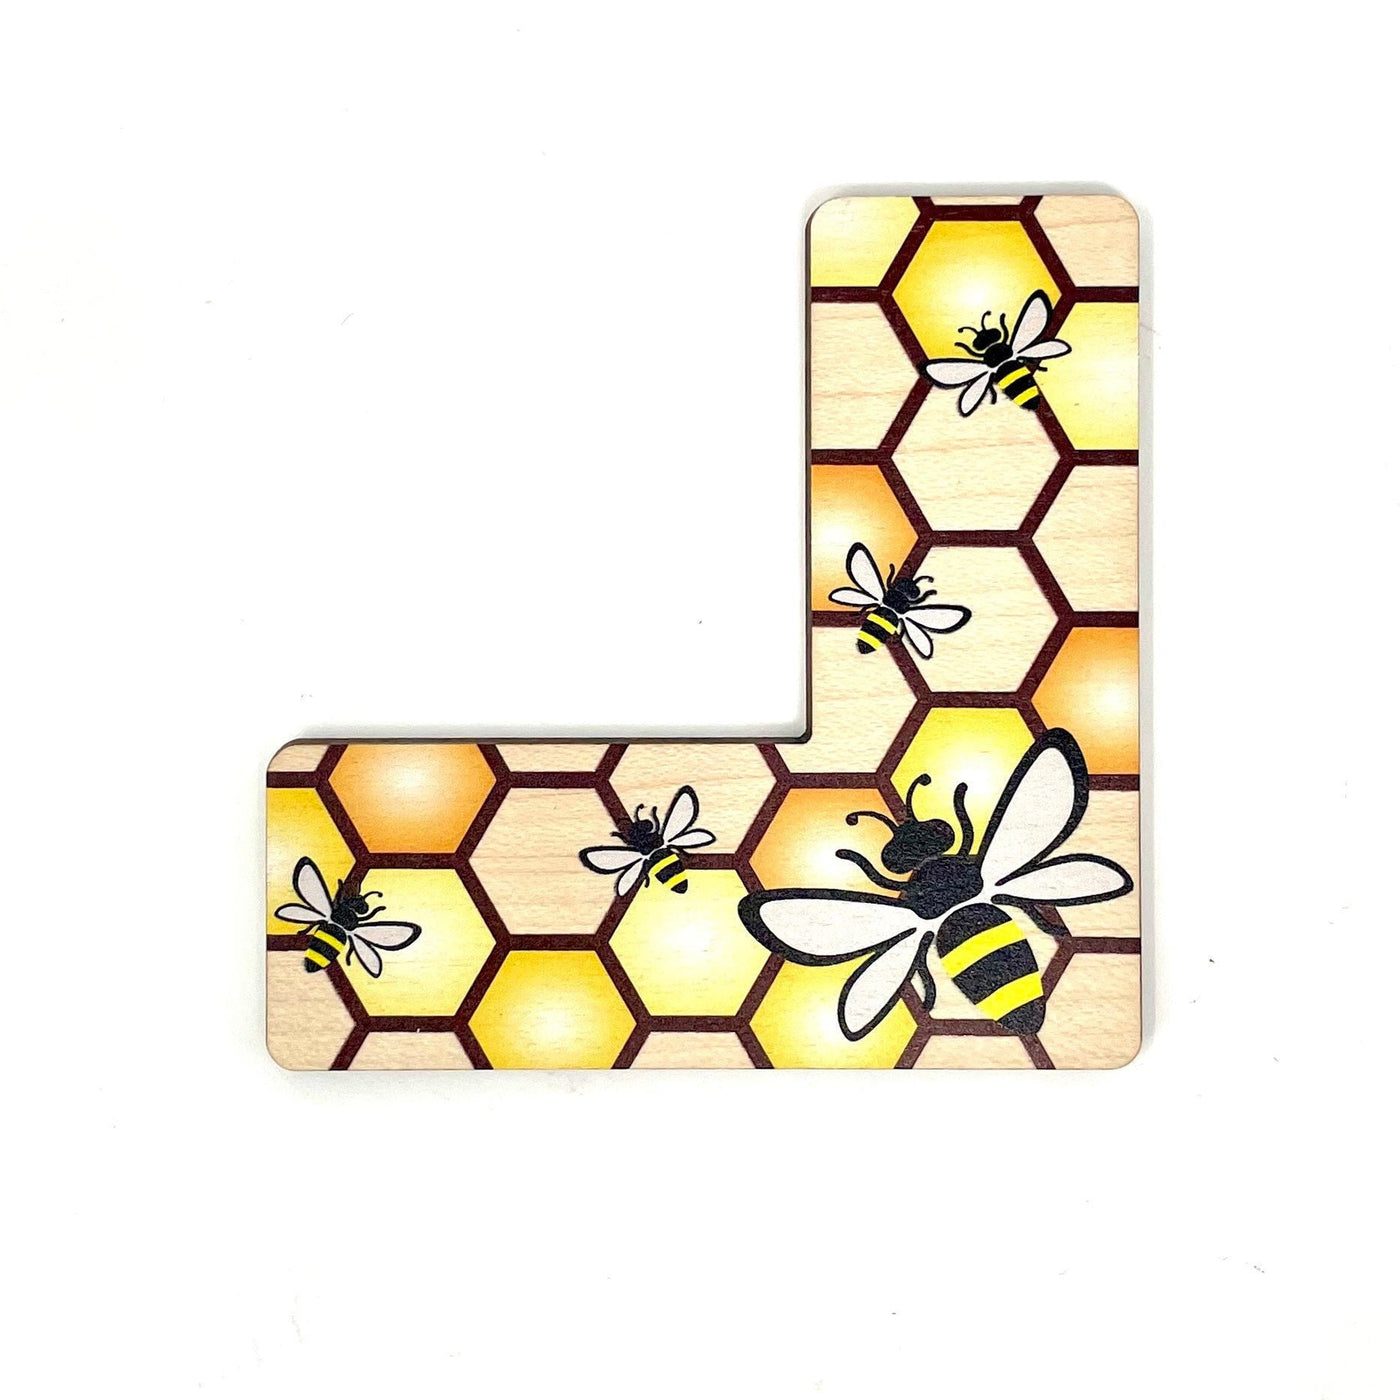 Bee magnetic pattern marker - cross Stitch and embroidery tool